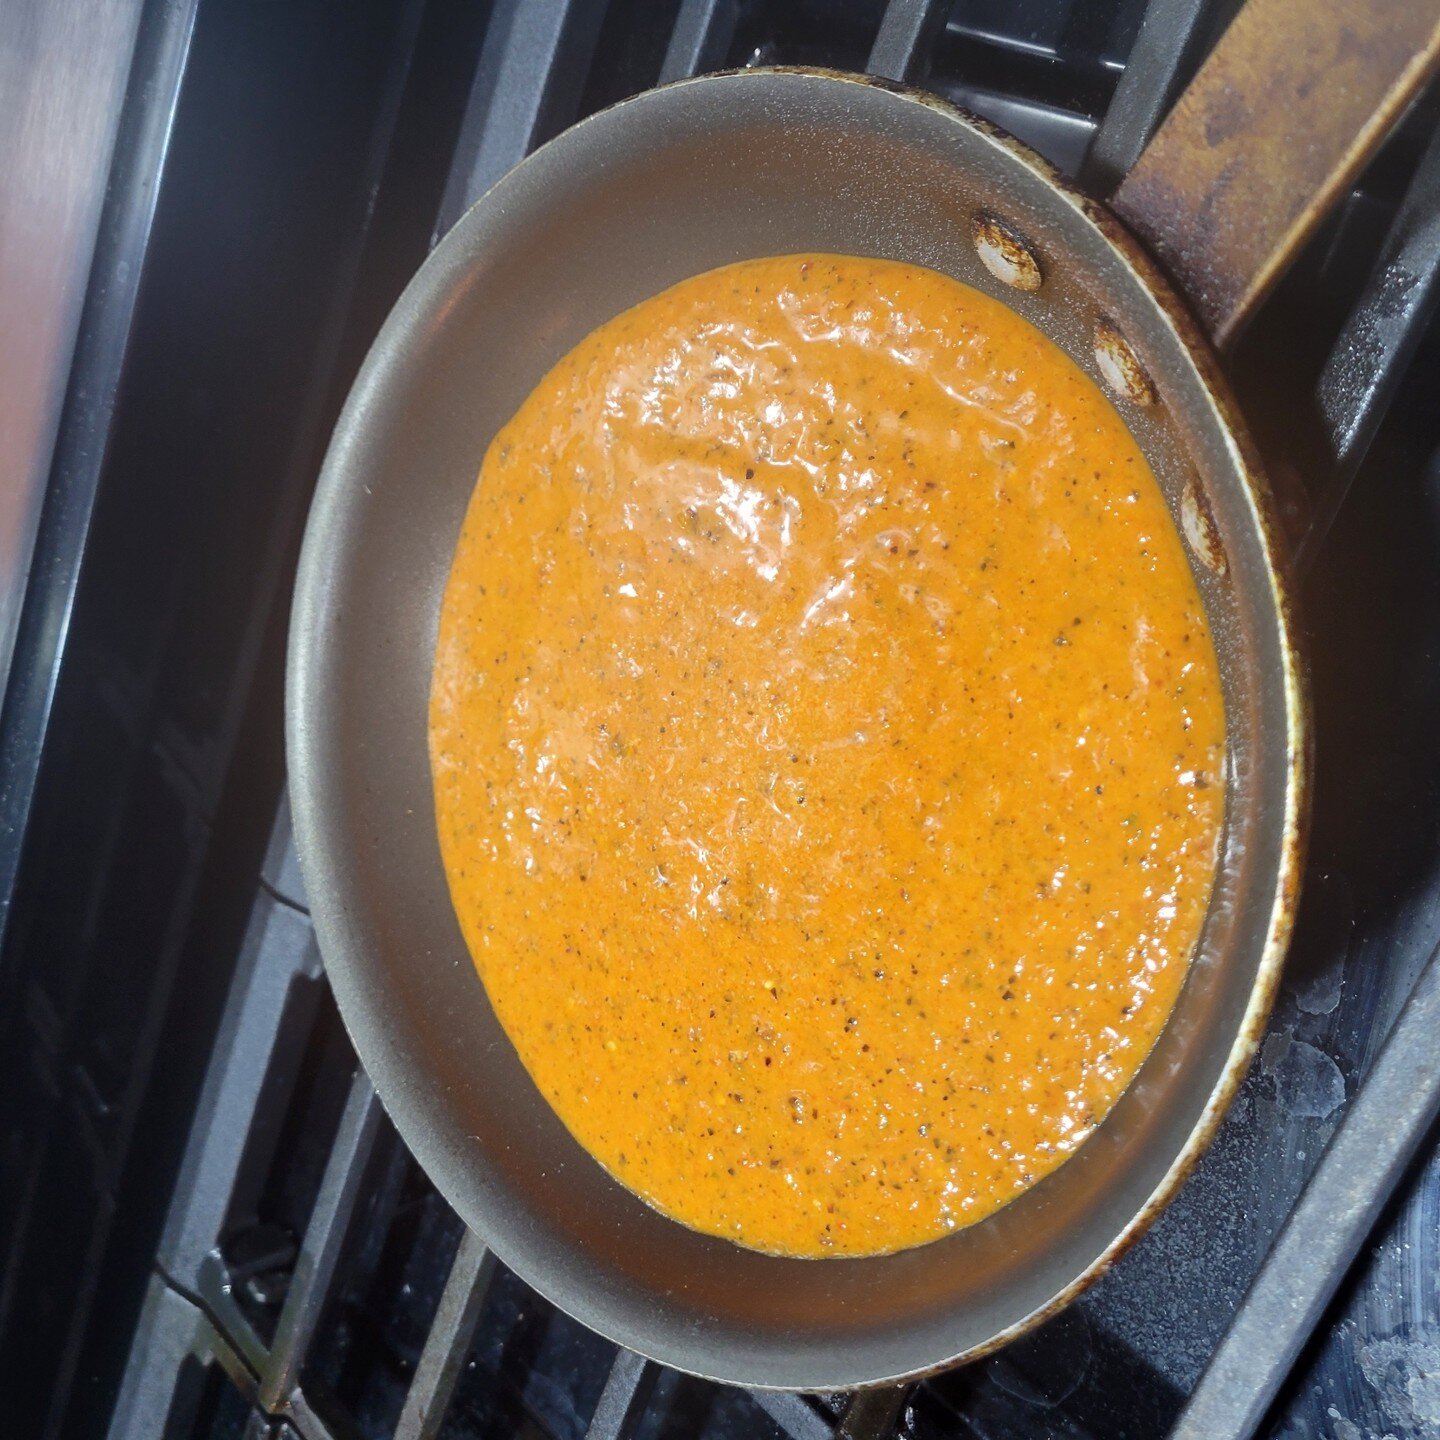 Rub it Right Roasted Red Pepper Sauce!

Full Recipe Available Here:

https://www.lemasterfamilykitchen.com/rub-it-right-1/2023/2/14/roasted-red-pepper-sauce